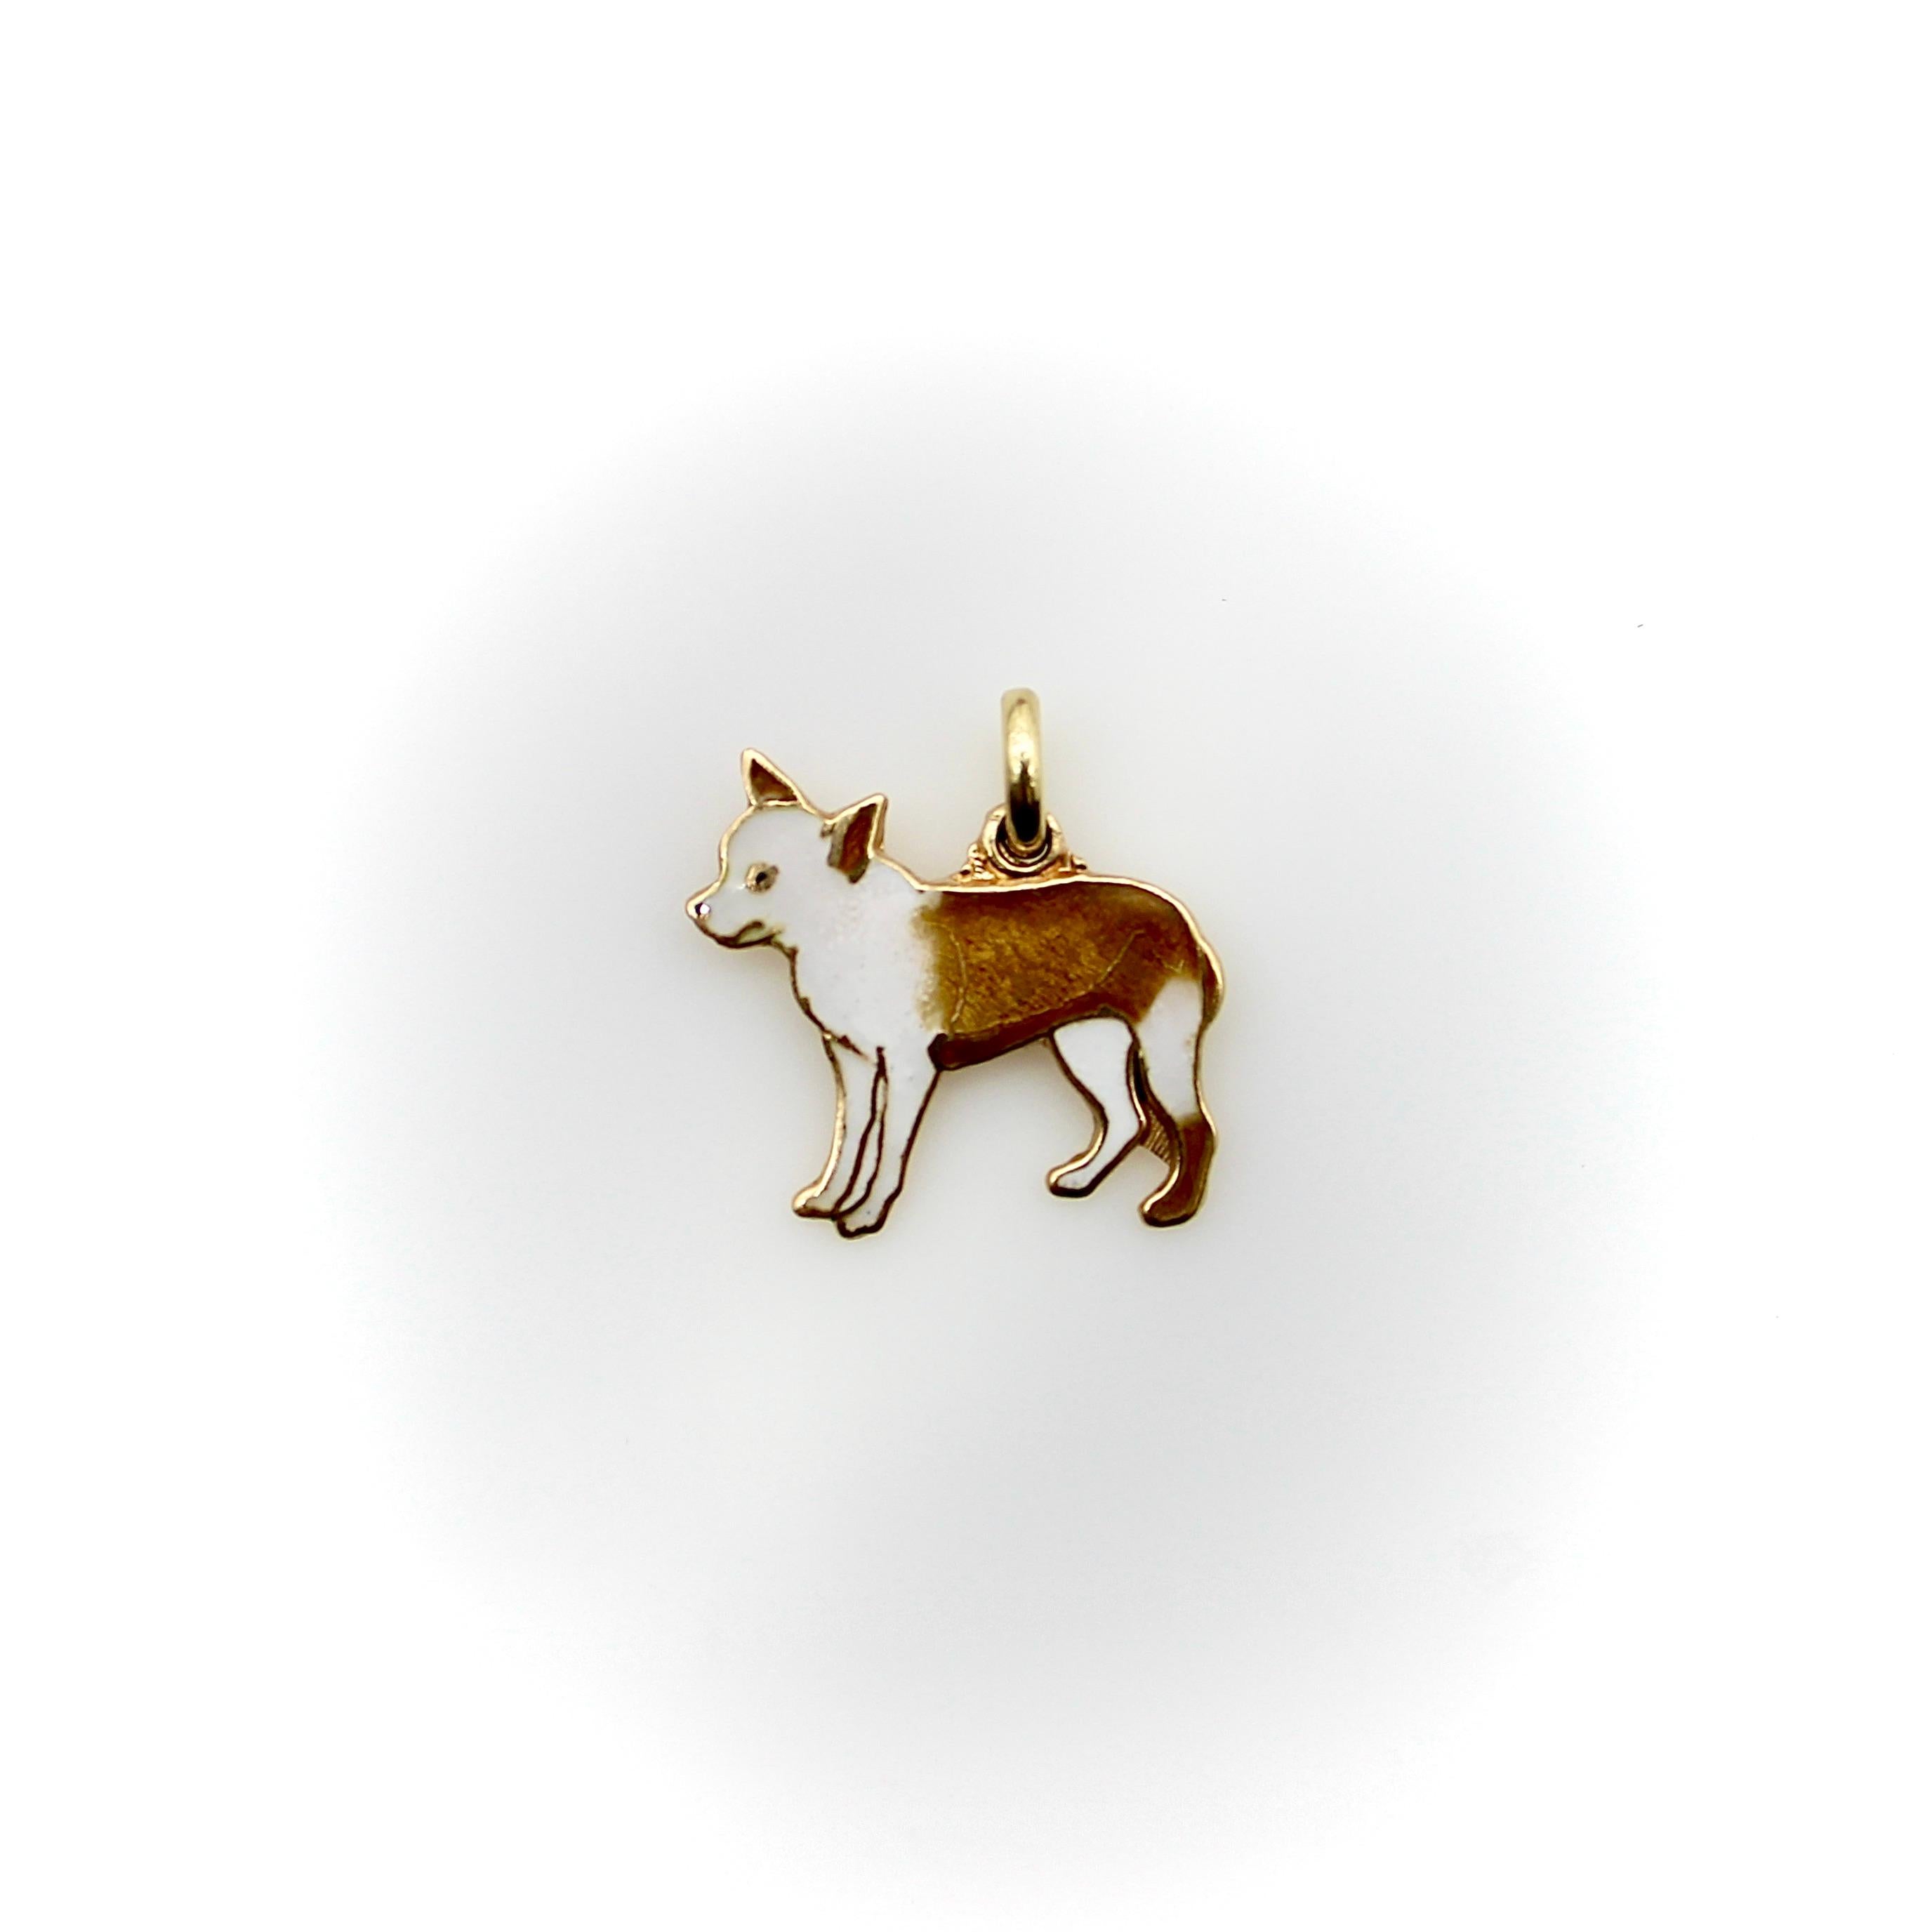 Made in 14k gold with enamel details, the two-toned white and tan chihuahua in this charm has a high forehead and long front legs. The charm does a great job expressing the chihuahuas timid but cute personality. Each charm is made to be breed